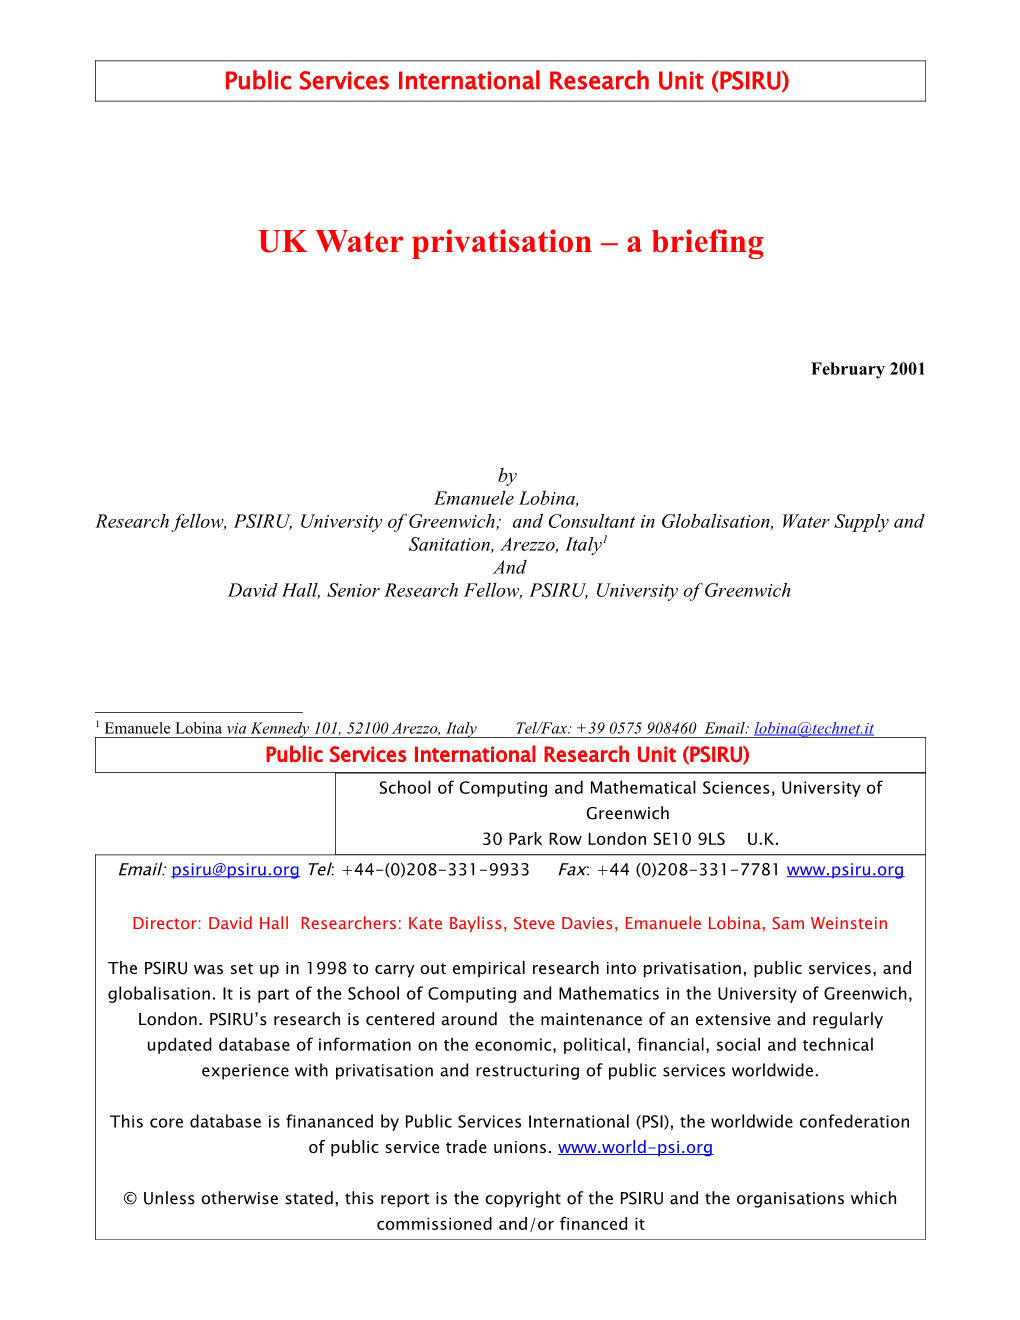 UK Water Industry & Problems with Privatised Water Companies